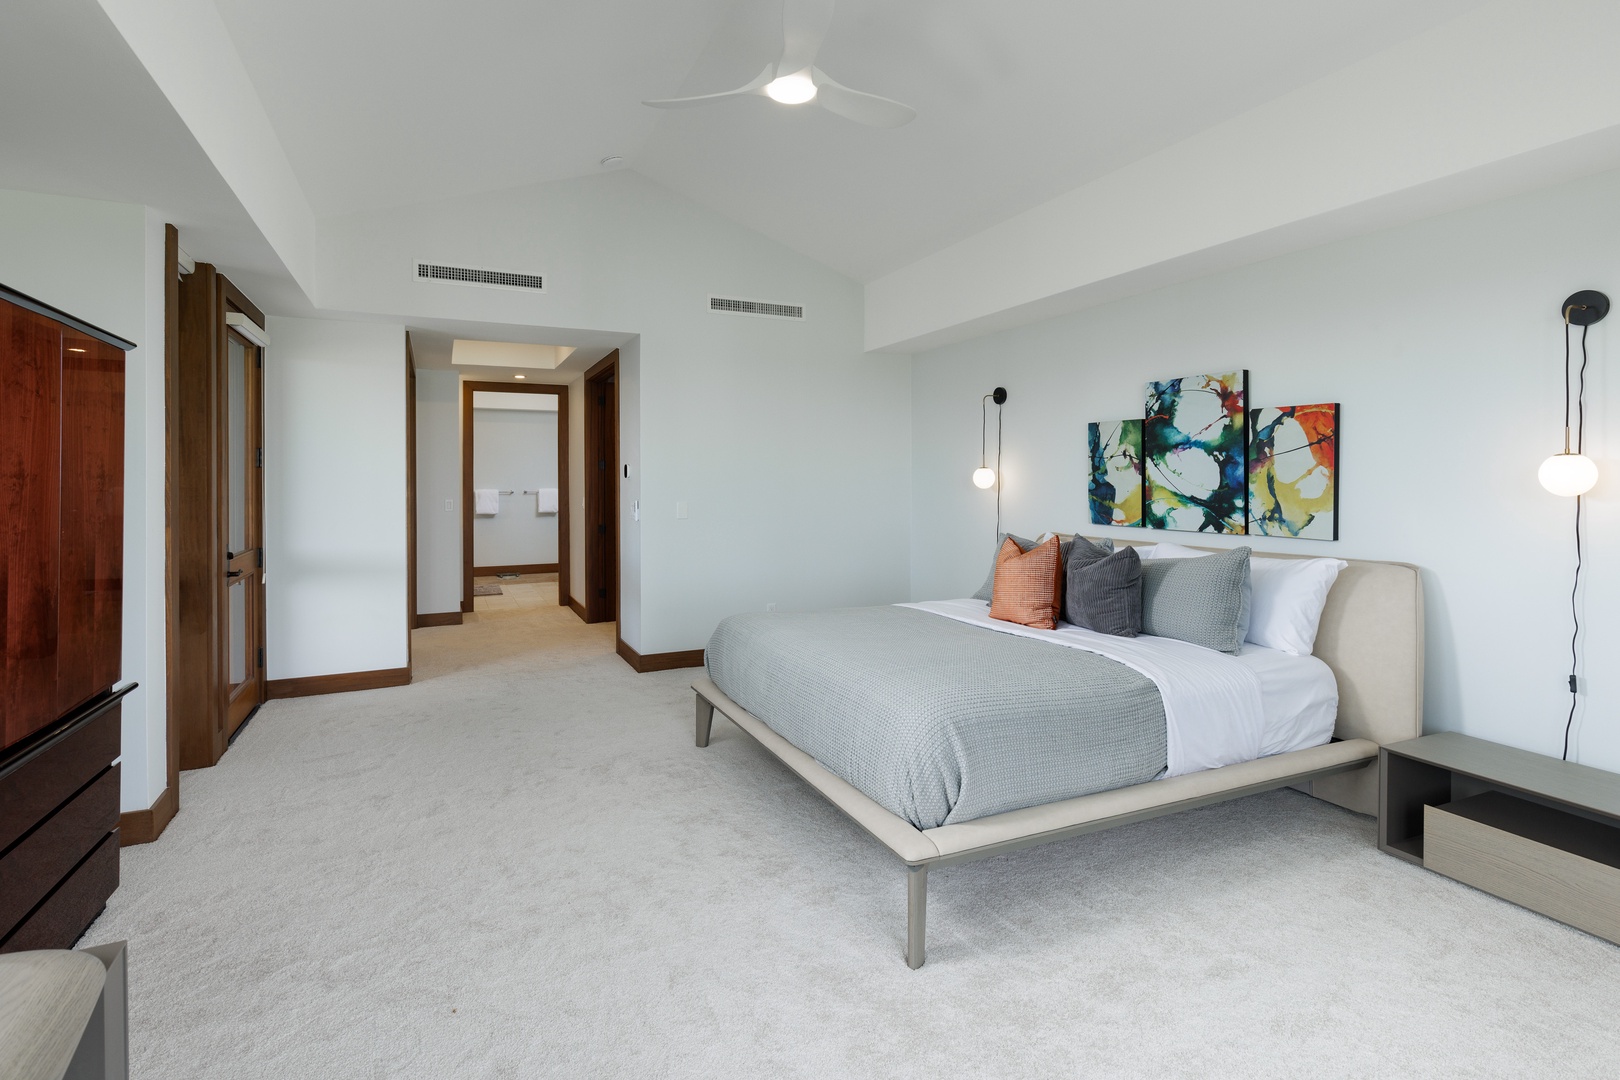 Kailua Kona Vacation Rentals, Fairway Villa 104A - Minimalist-modern style for a bright and airy suite.